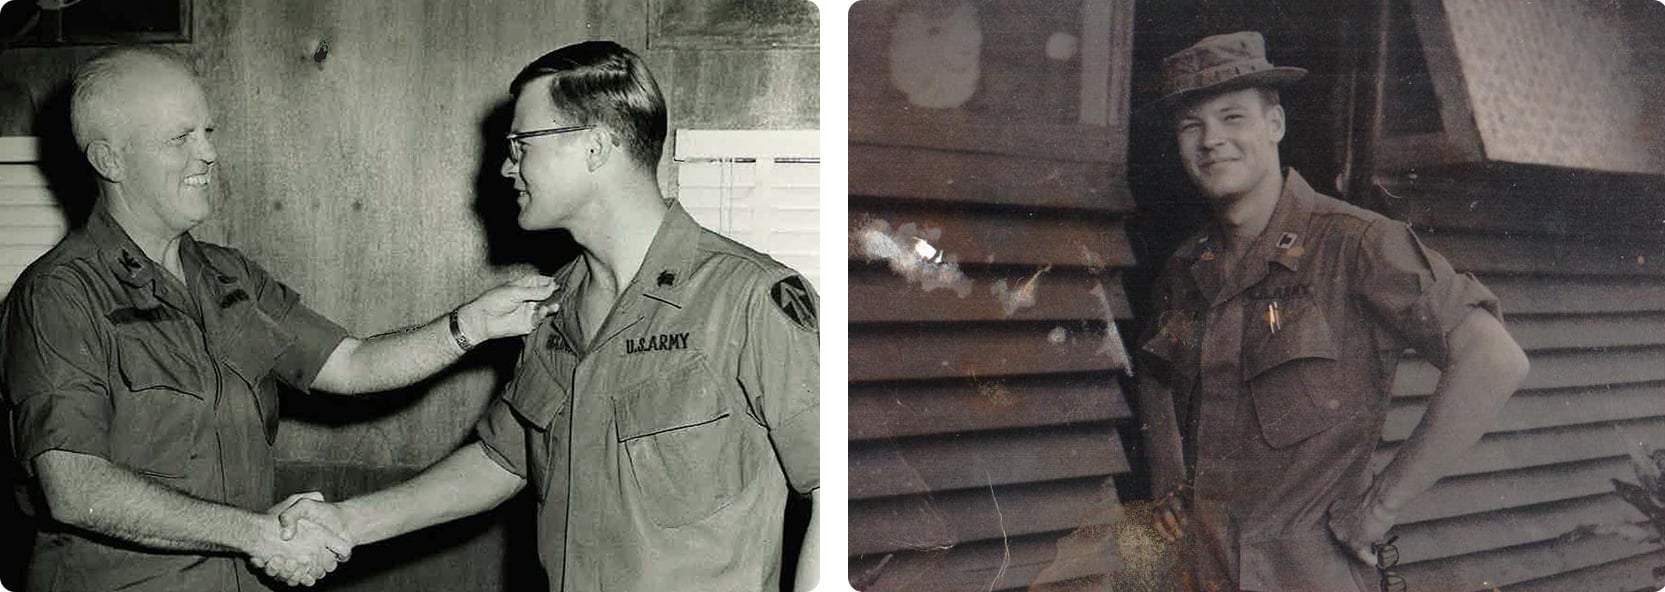 Scott Higgins during his time in the Army in Vietnam, 1967